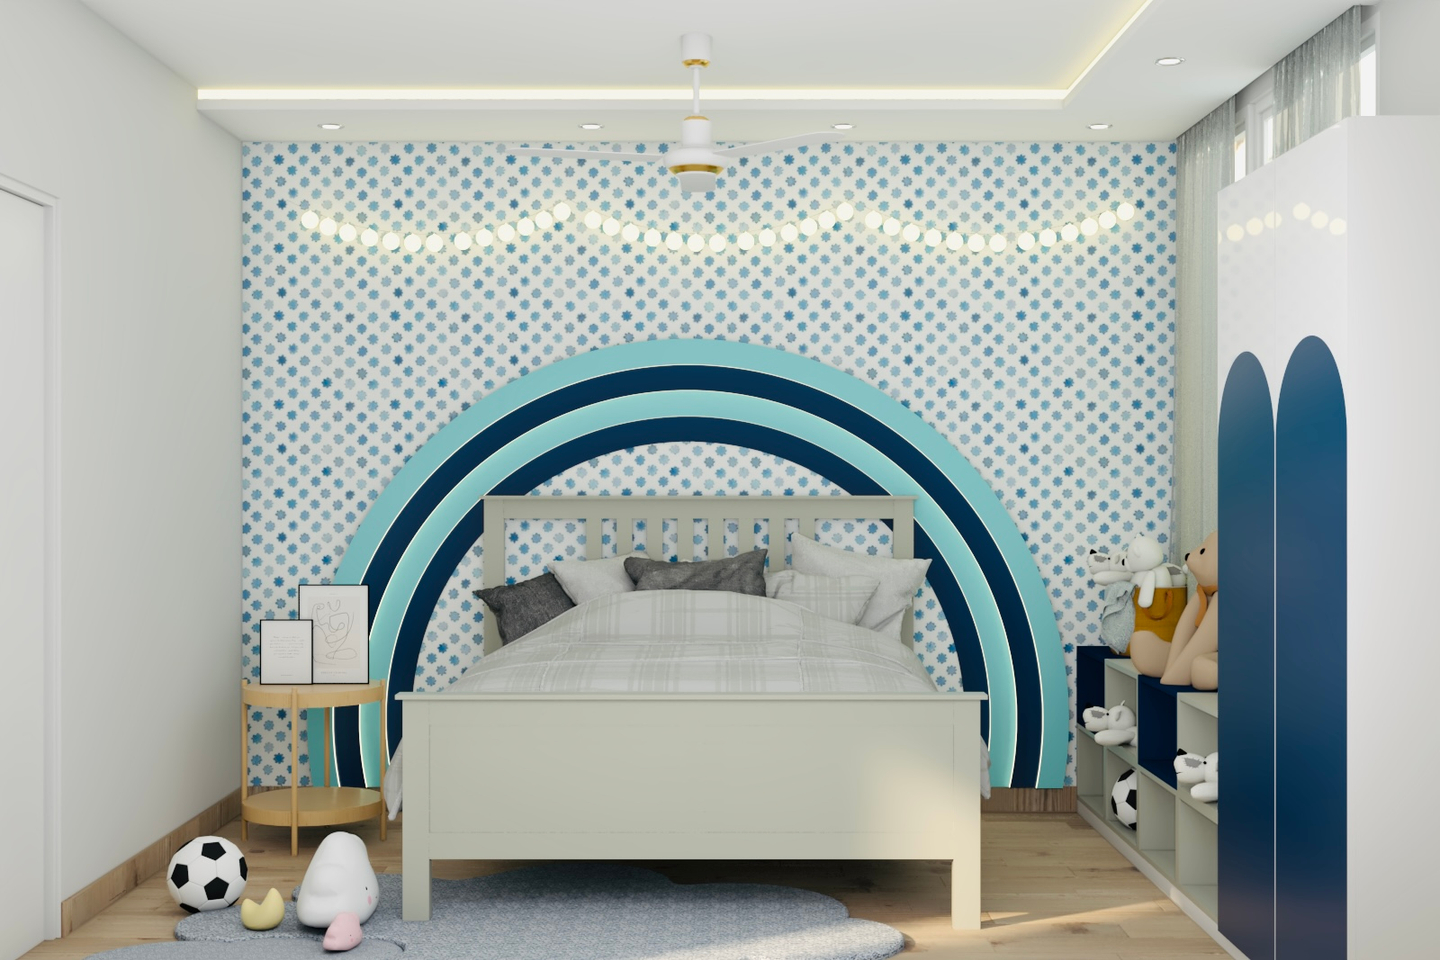 Kids' Room With Ikea Bed - Livspace